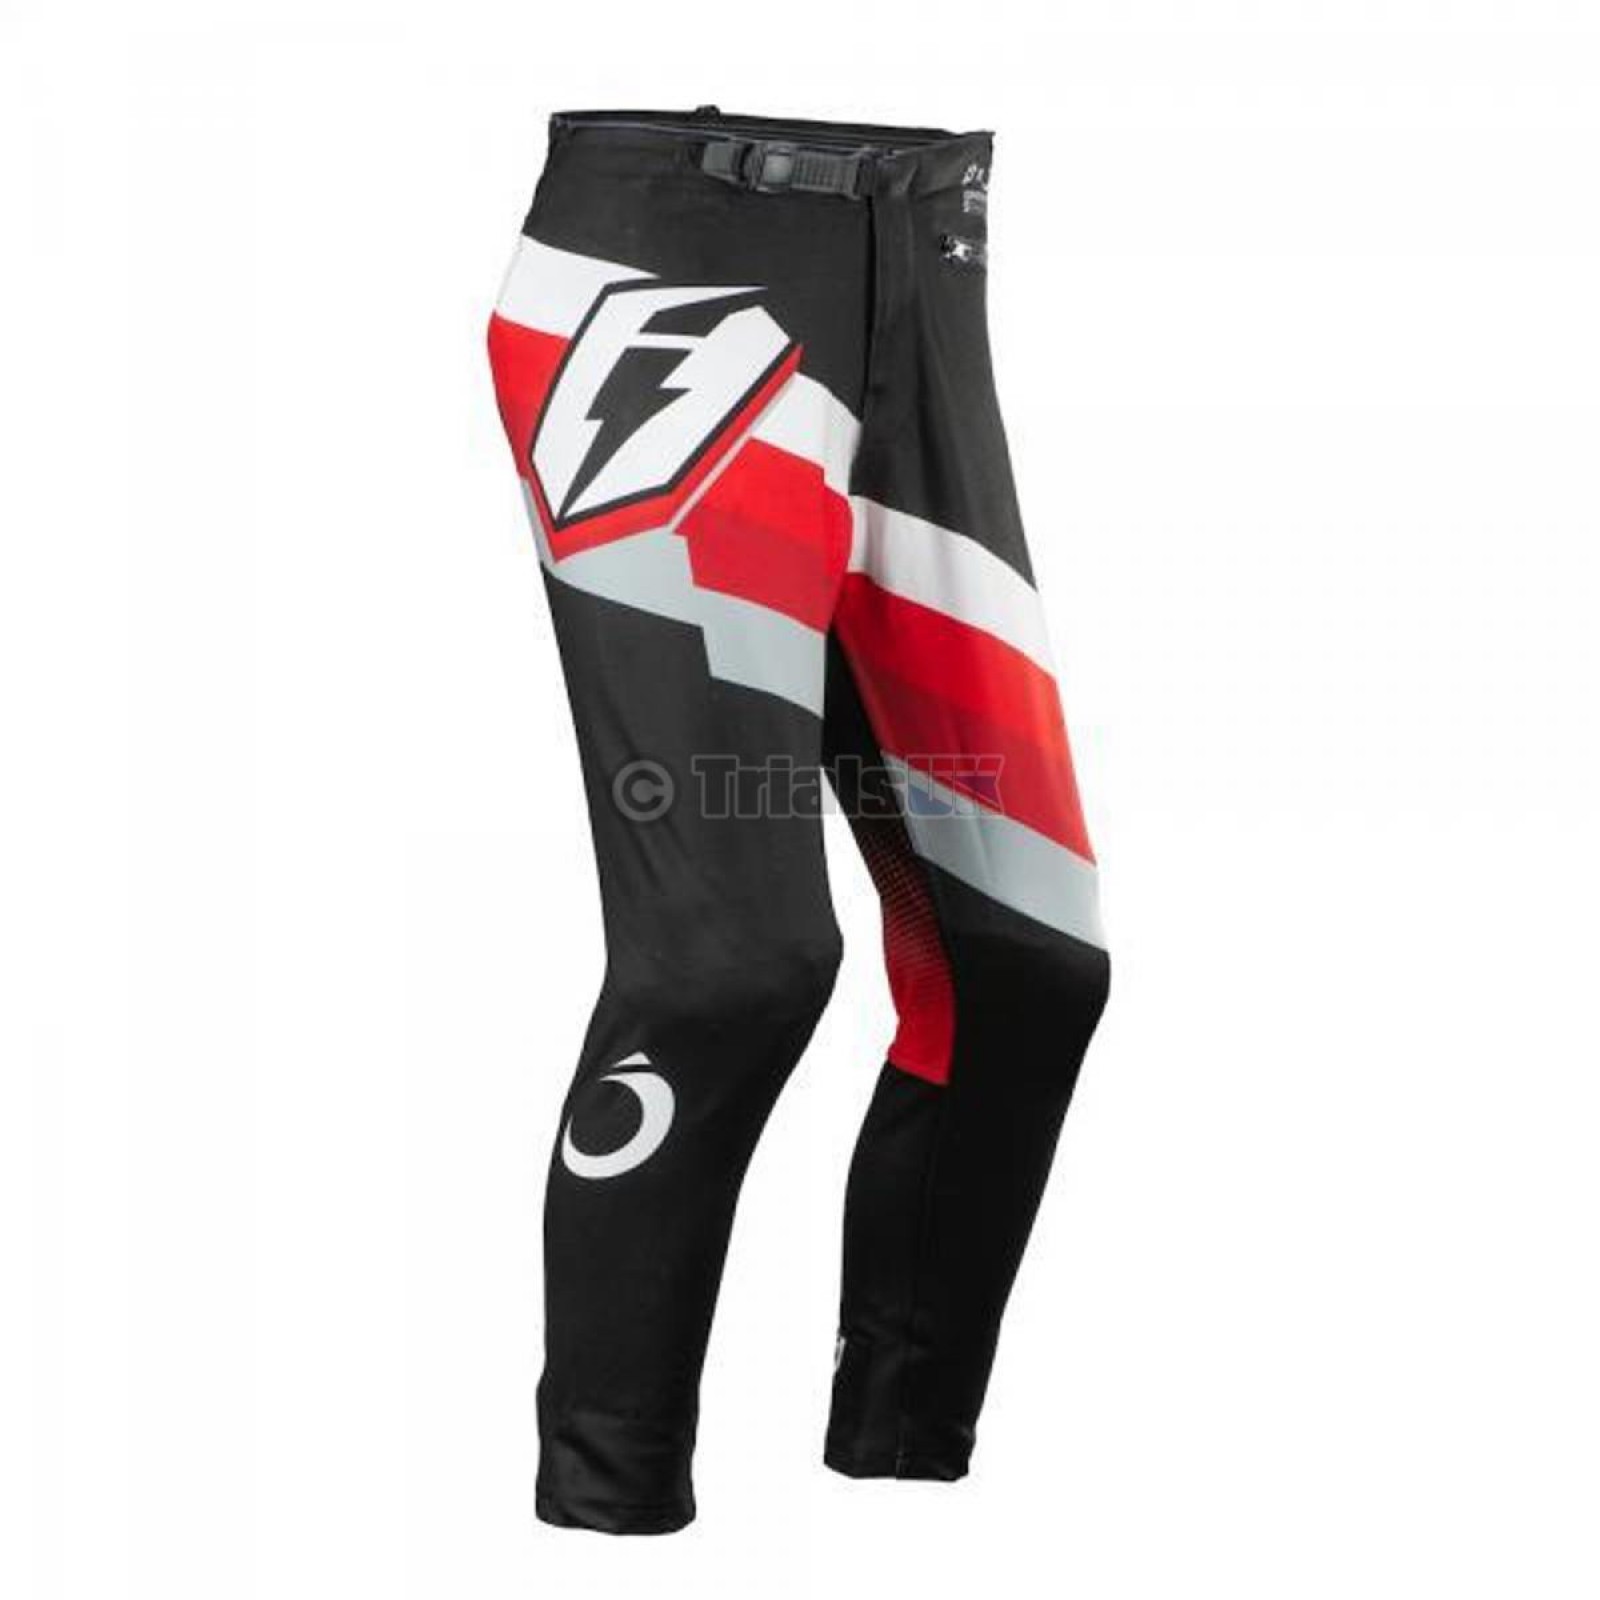 Junior/Youth/Kids Oset-Jitsie Official Limited Edition Trials Riding Pant 